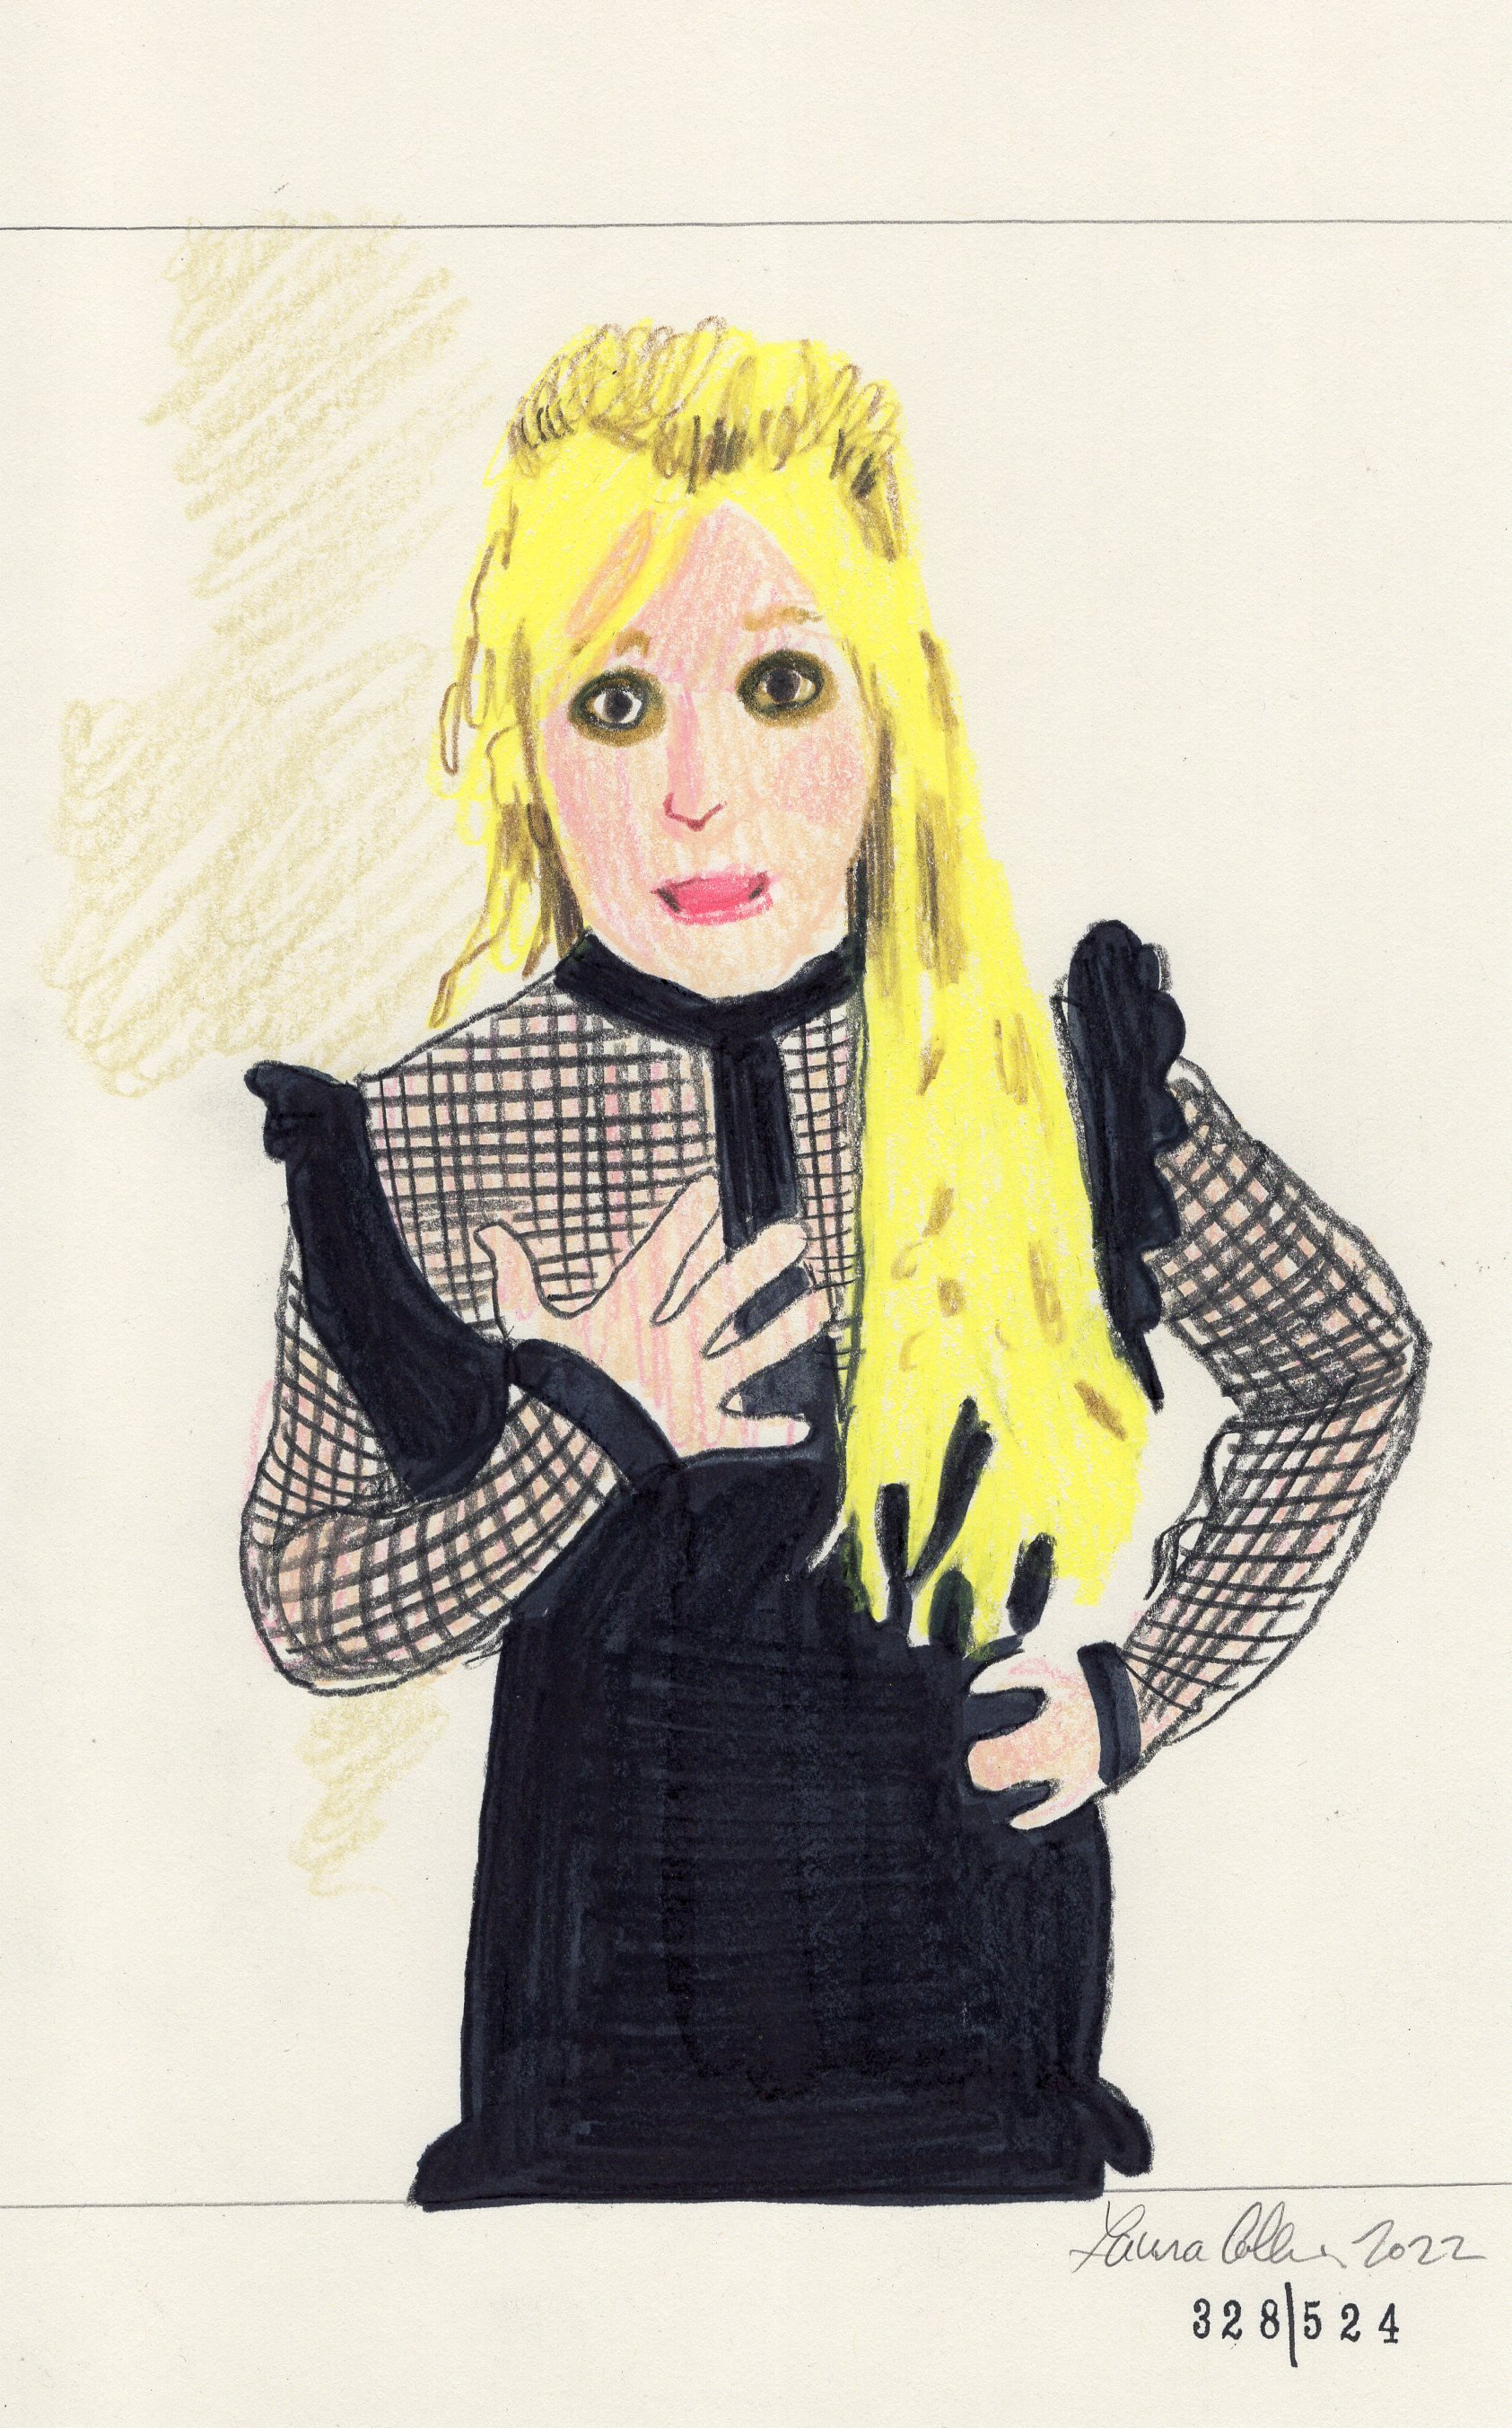 Laura Collins Britney Spears Animation 6x9in mixed media 2022 no328.jpg